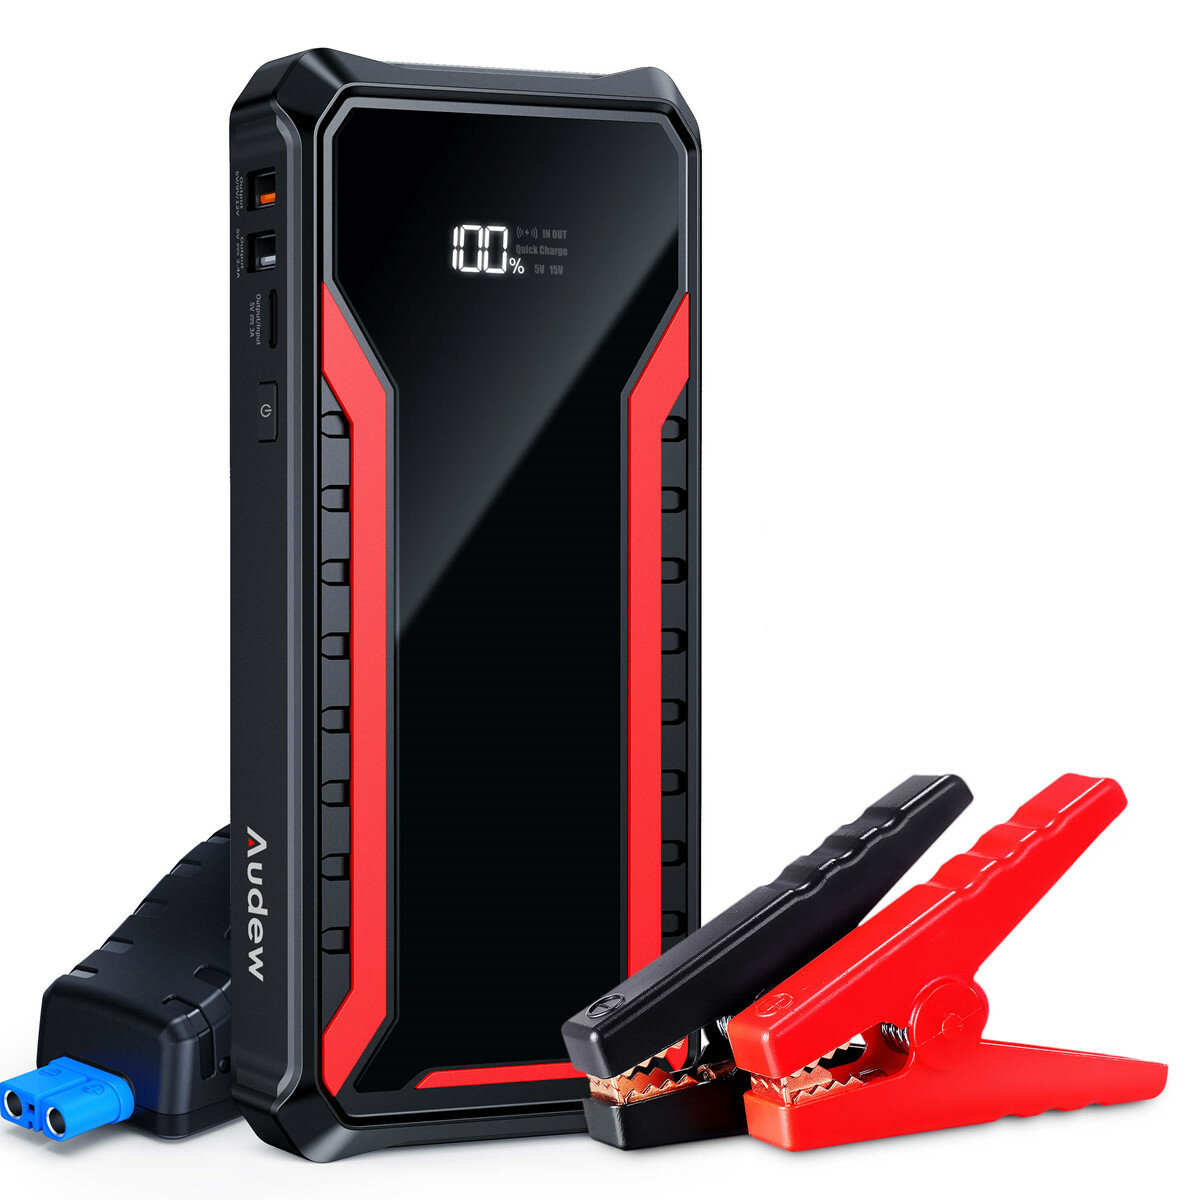 

Audew 1500A 18000mAh Car Jump Starter for Up To 8.5L Gas or 6.5L Diesel Engines with 15W Wireless Quick Charging